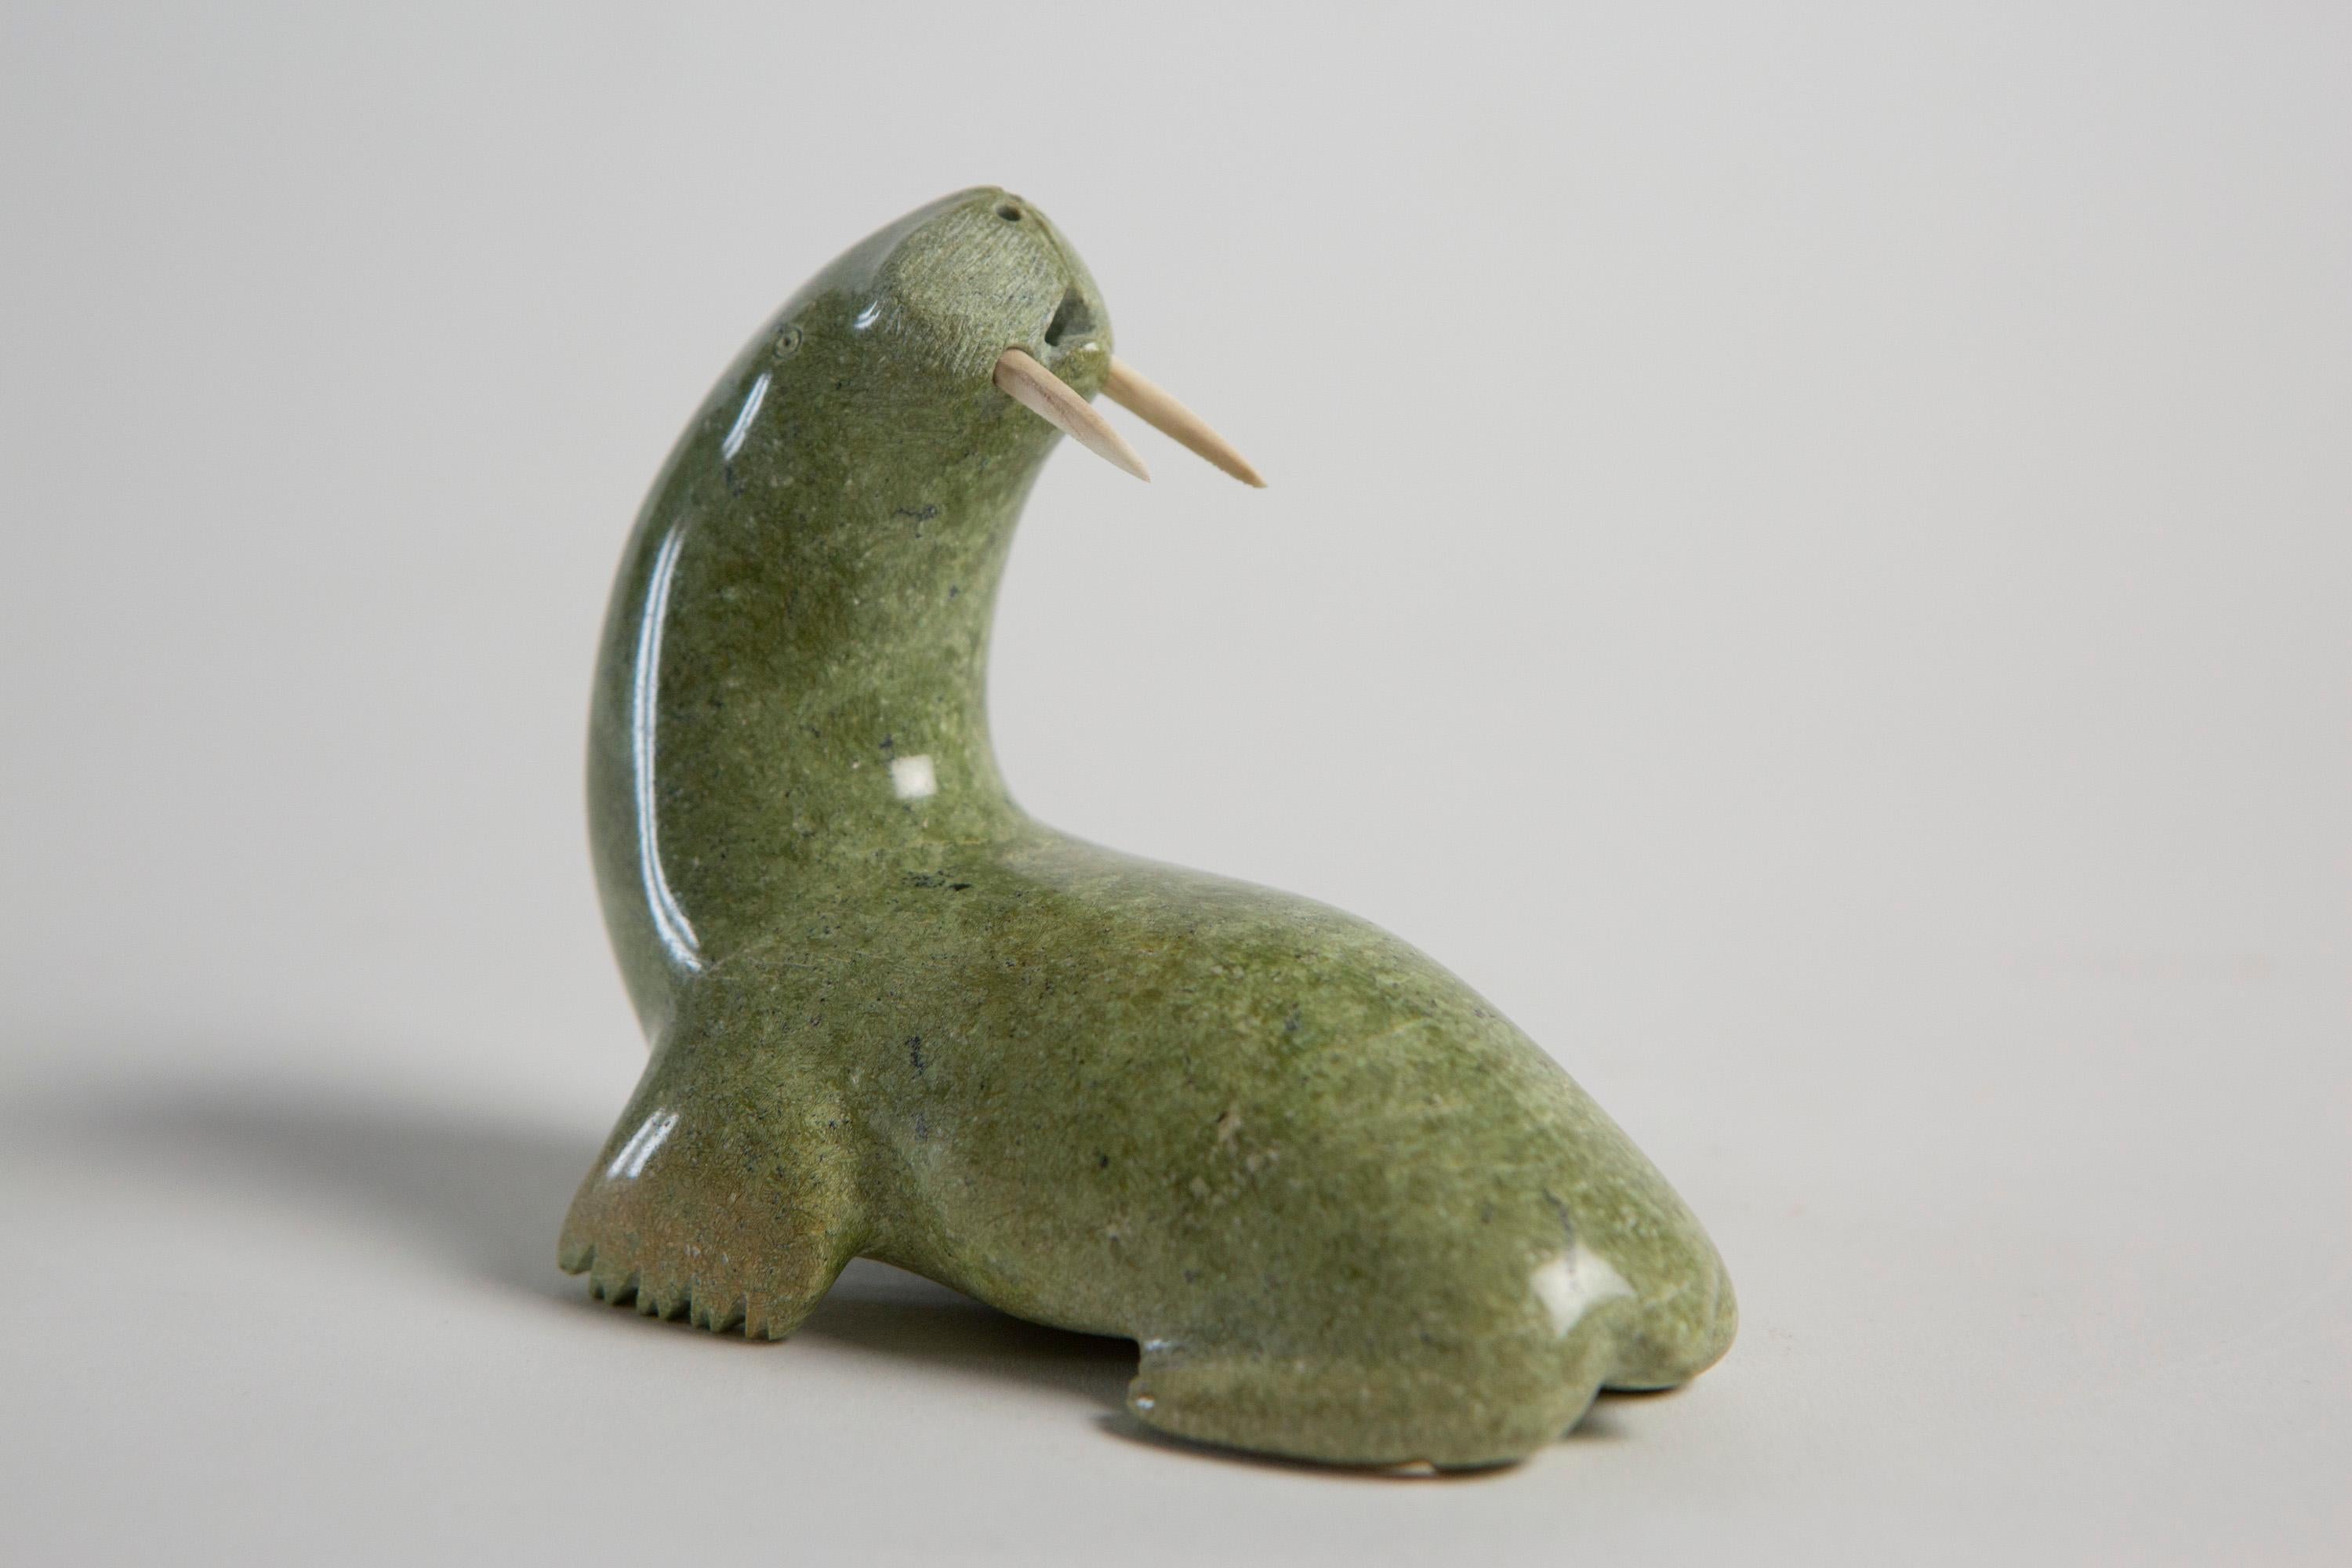 SIMANEK SAGIATUK (1930-) Stone Walrus, Lake Harbour / Kimmirut - Signed 

Simanek Sagiatuk is an Inuit art sculpture carver from the Lake Harbour community. He used to work mostly with serpentine, a very hard stone which is originally from